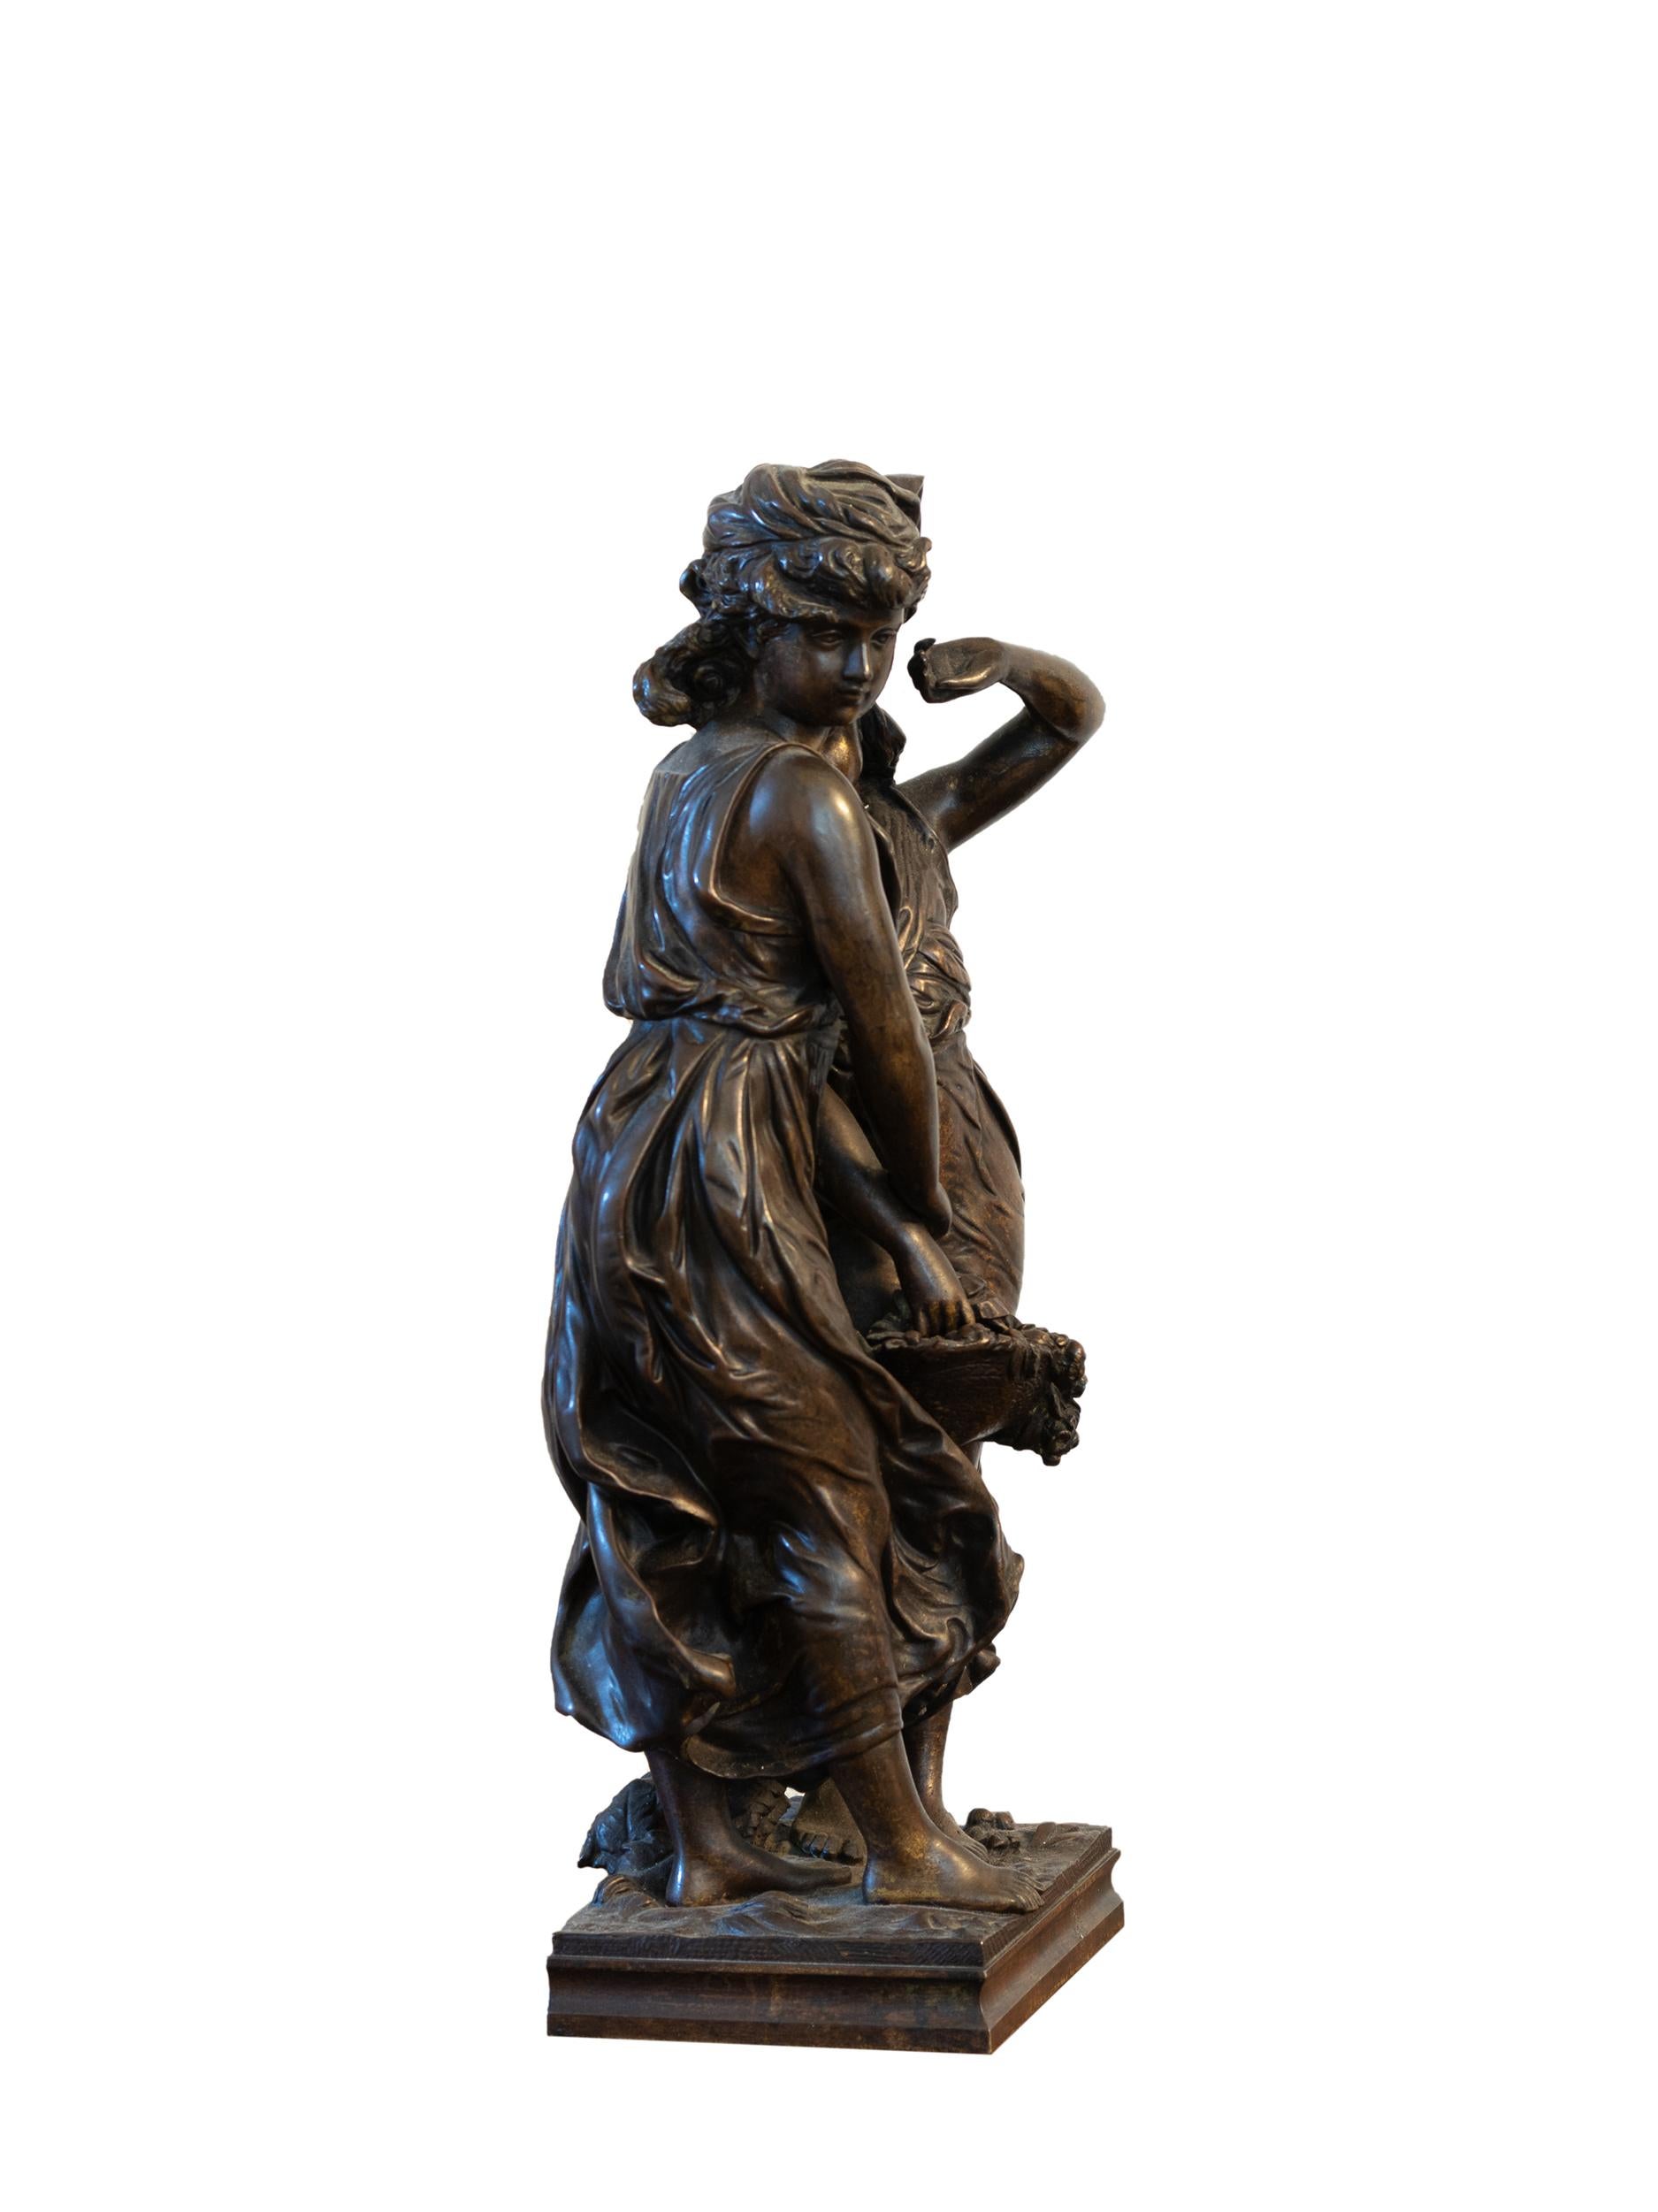 A spelter statue of Demeter and Persephone embracing it other with their tunics flowing in the wind. Signature “H Moreau” signed and foundry seal title statue “Protection” circa 1880.  
Hippolyte François Moreau (1832-1927) Title Protection /